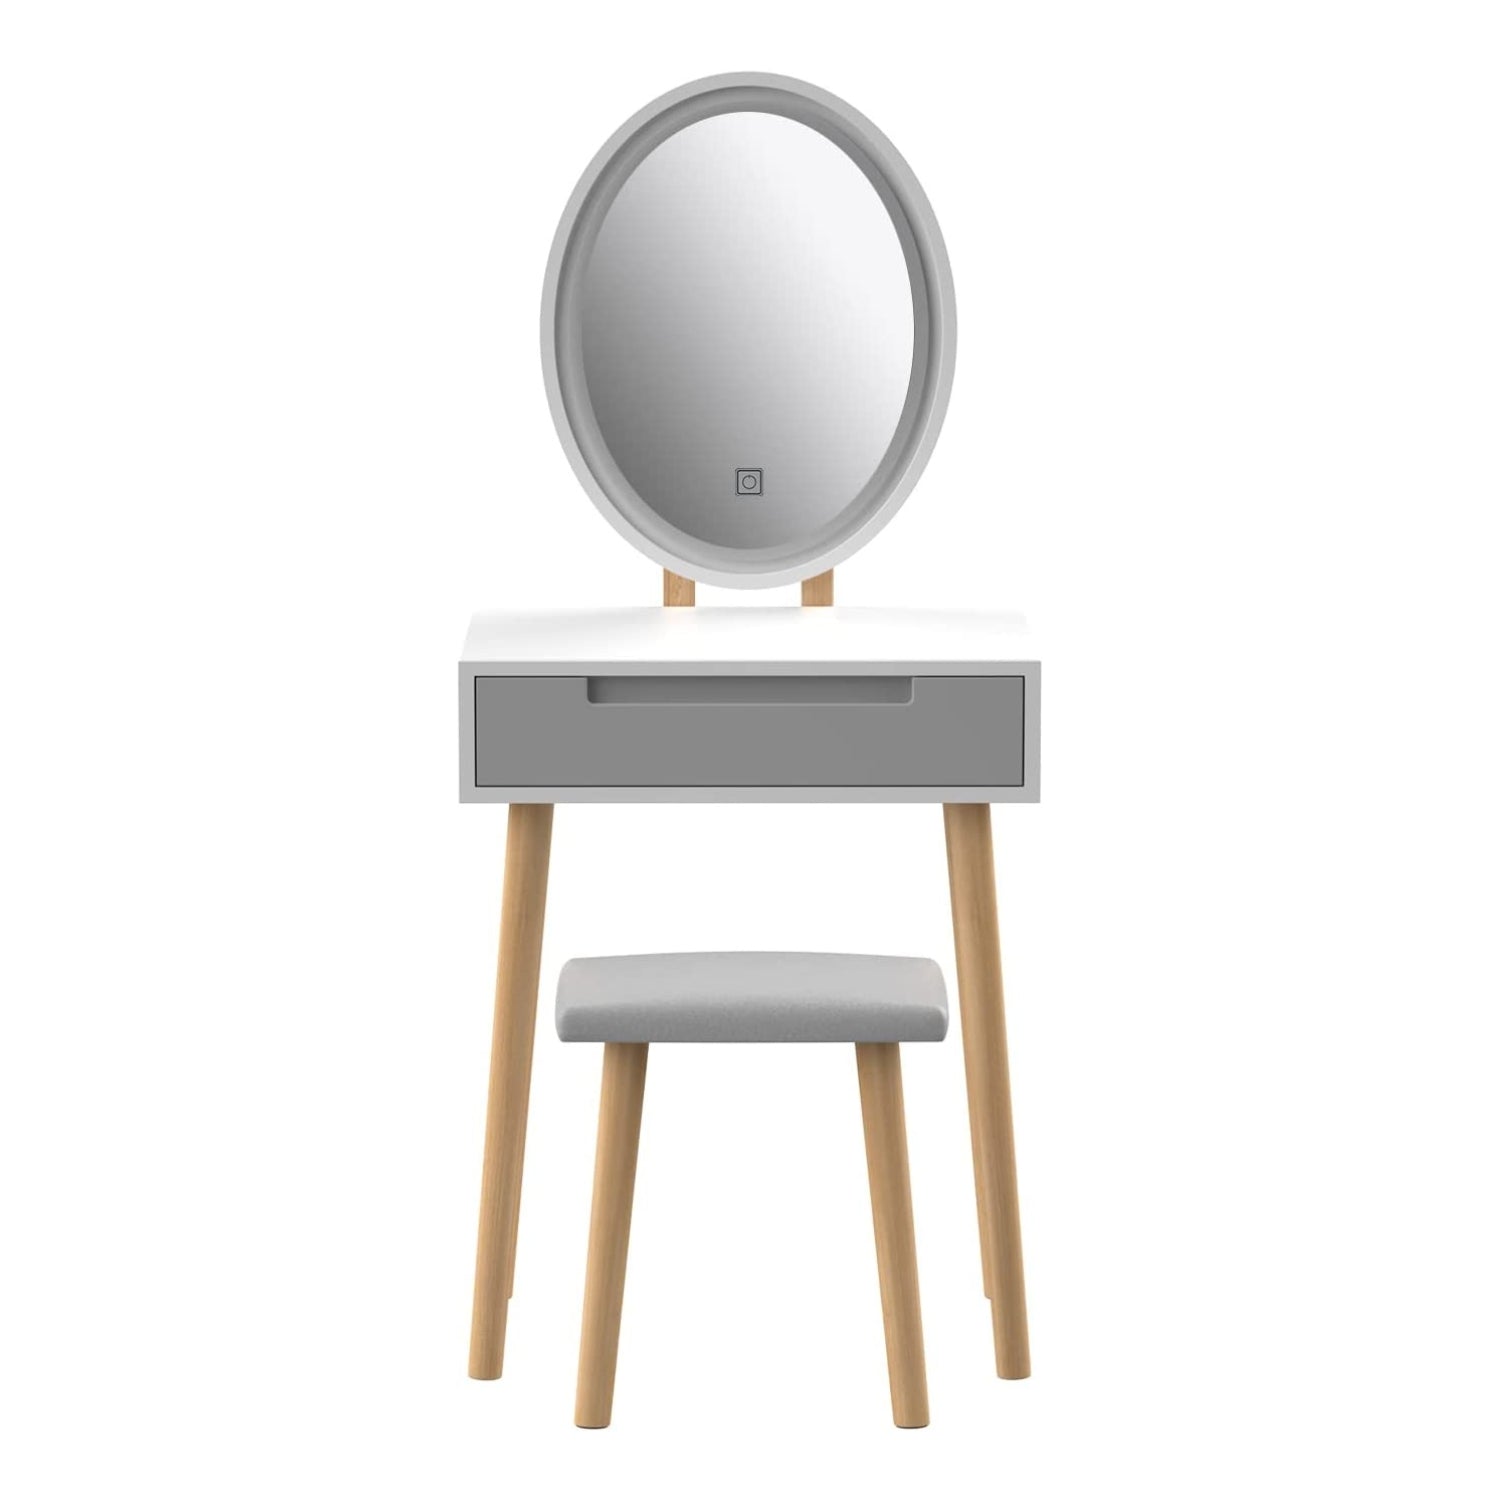 Makeup Vanity Table Set with 3 Adjustable Lighted Mirror Stool HW1151GY with white background